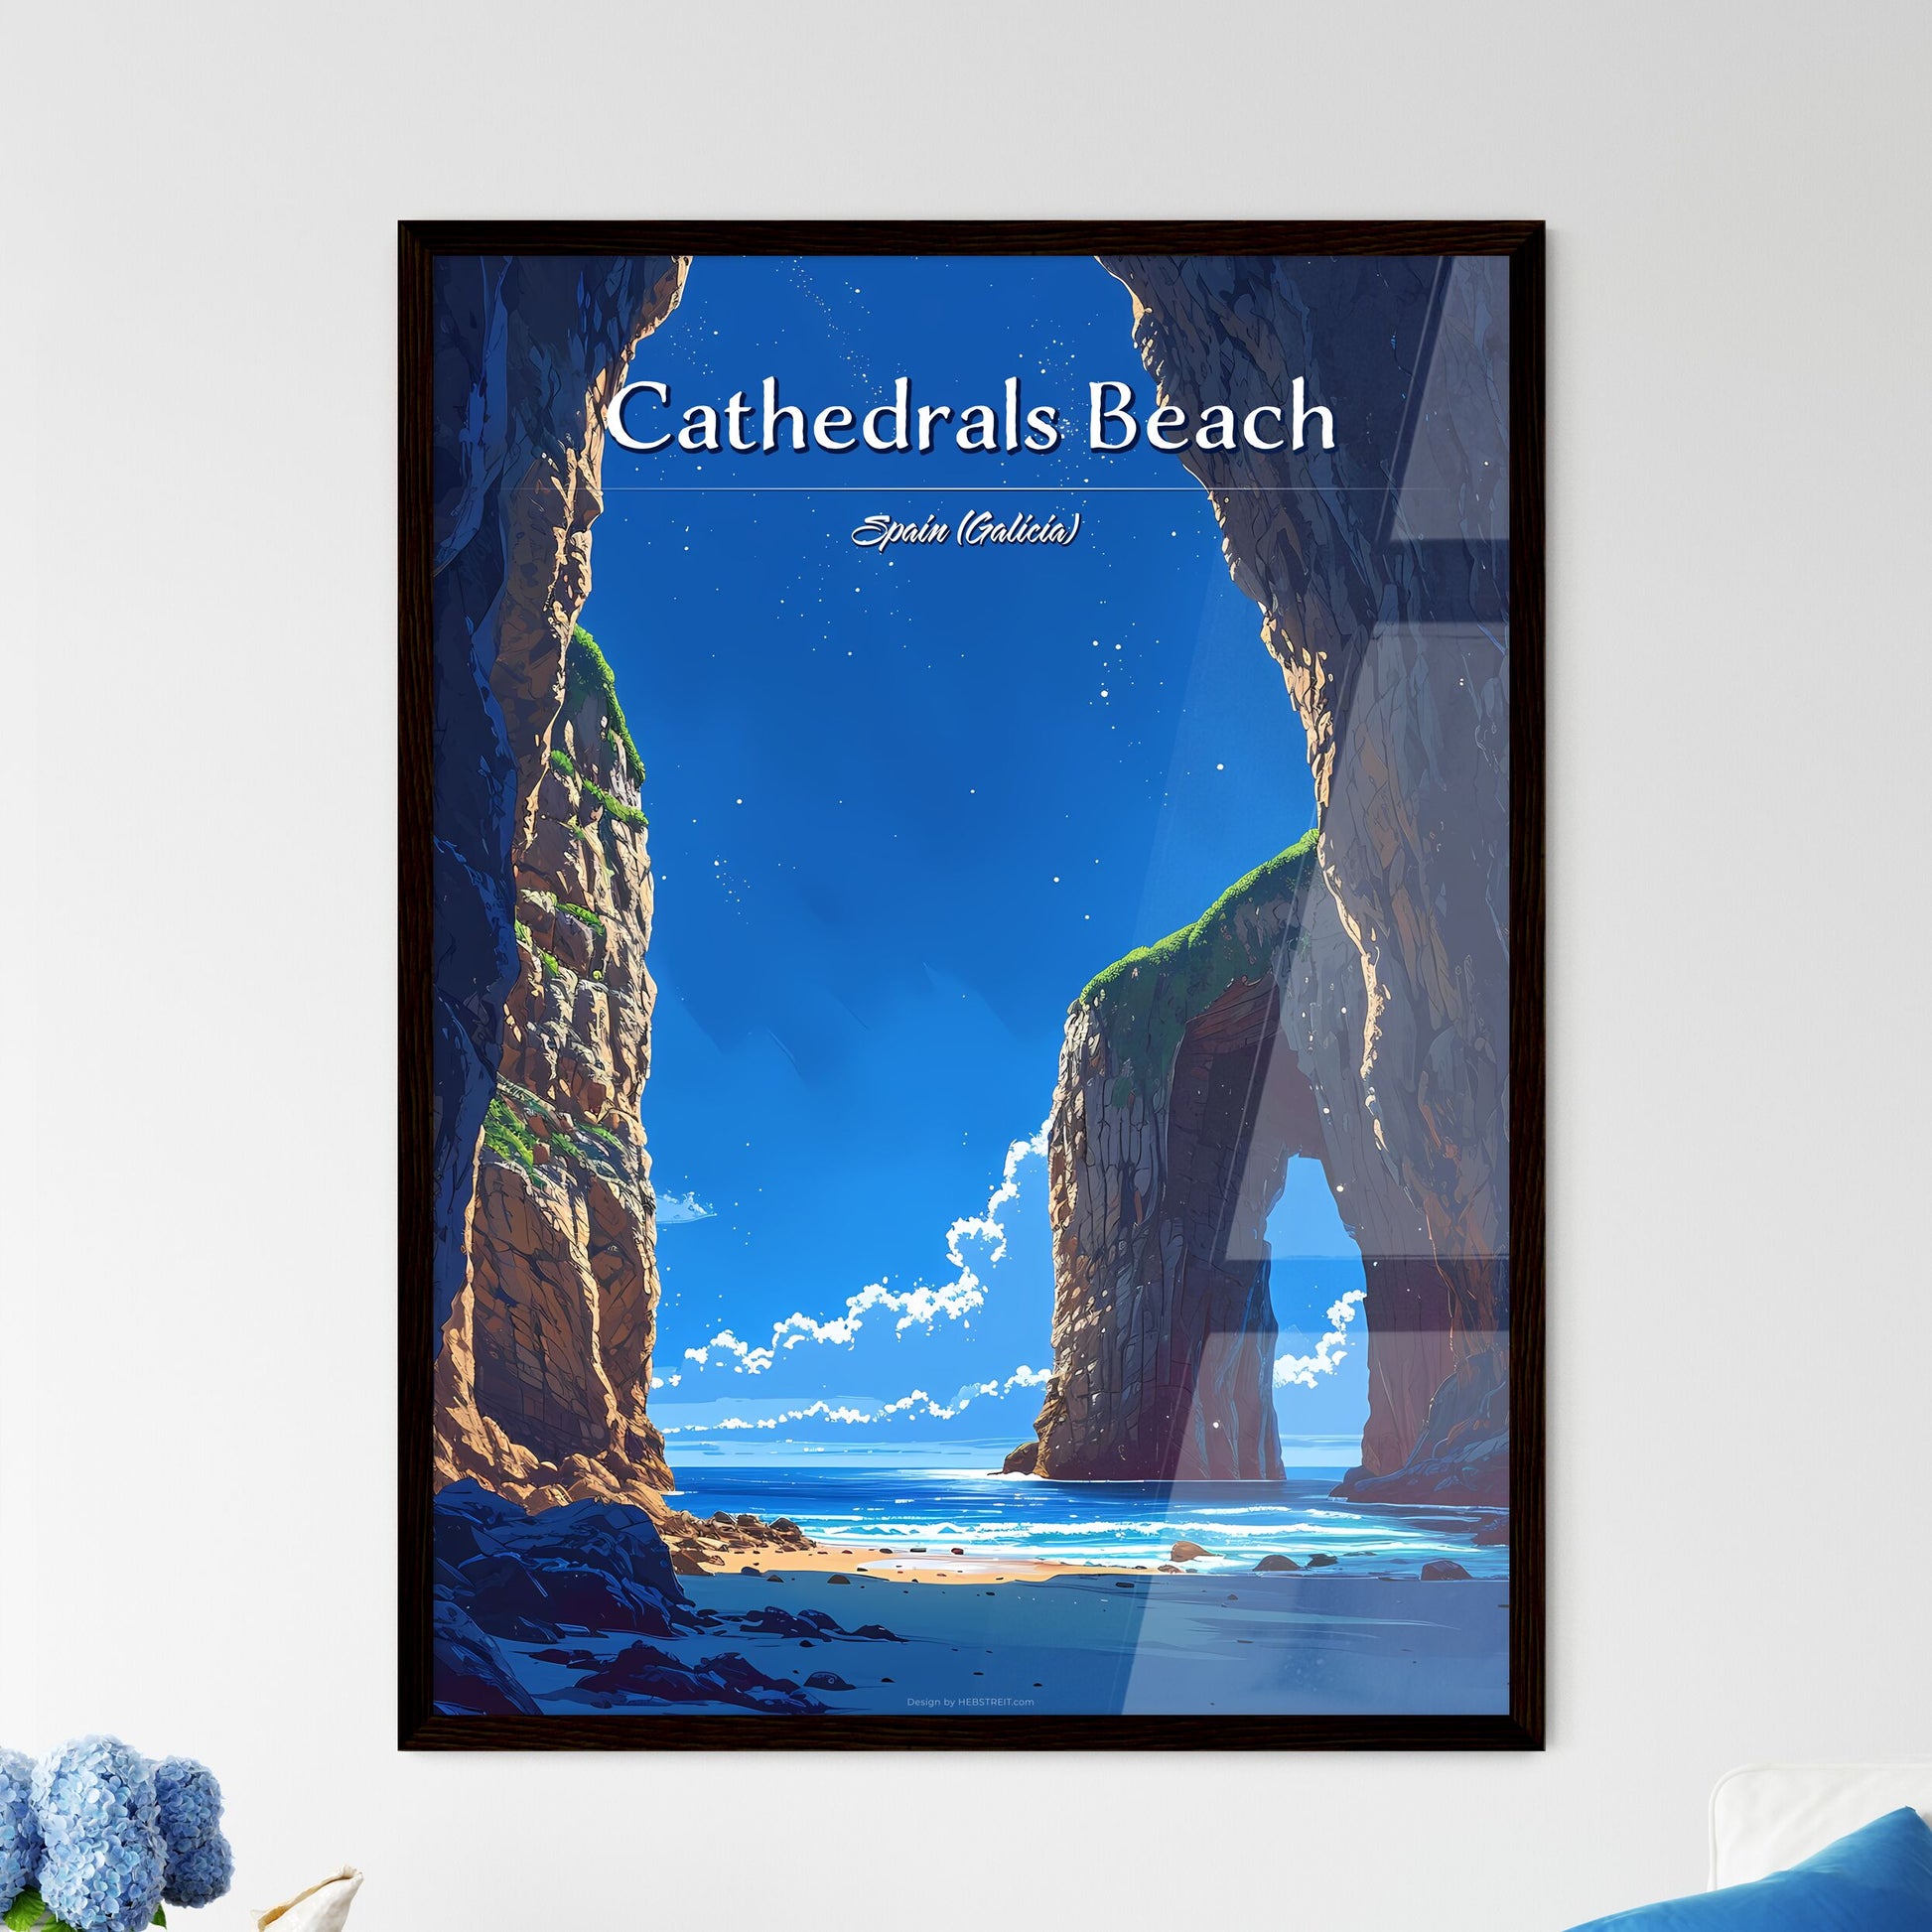 Cathedrals Beach, Spain (Galicia) - Art print of a rock formations on a beach Default Title